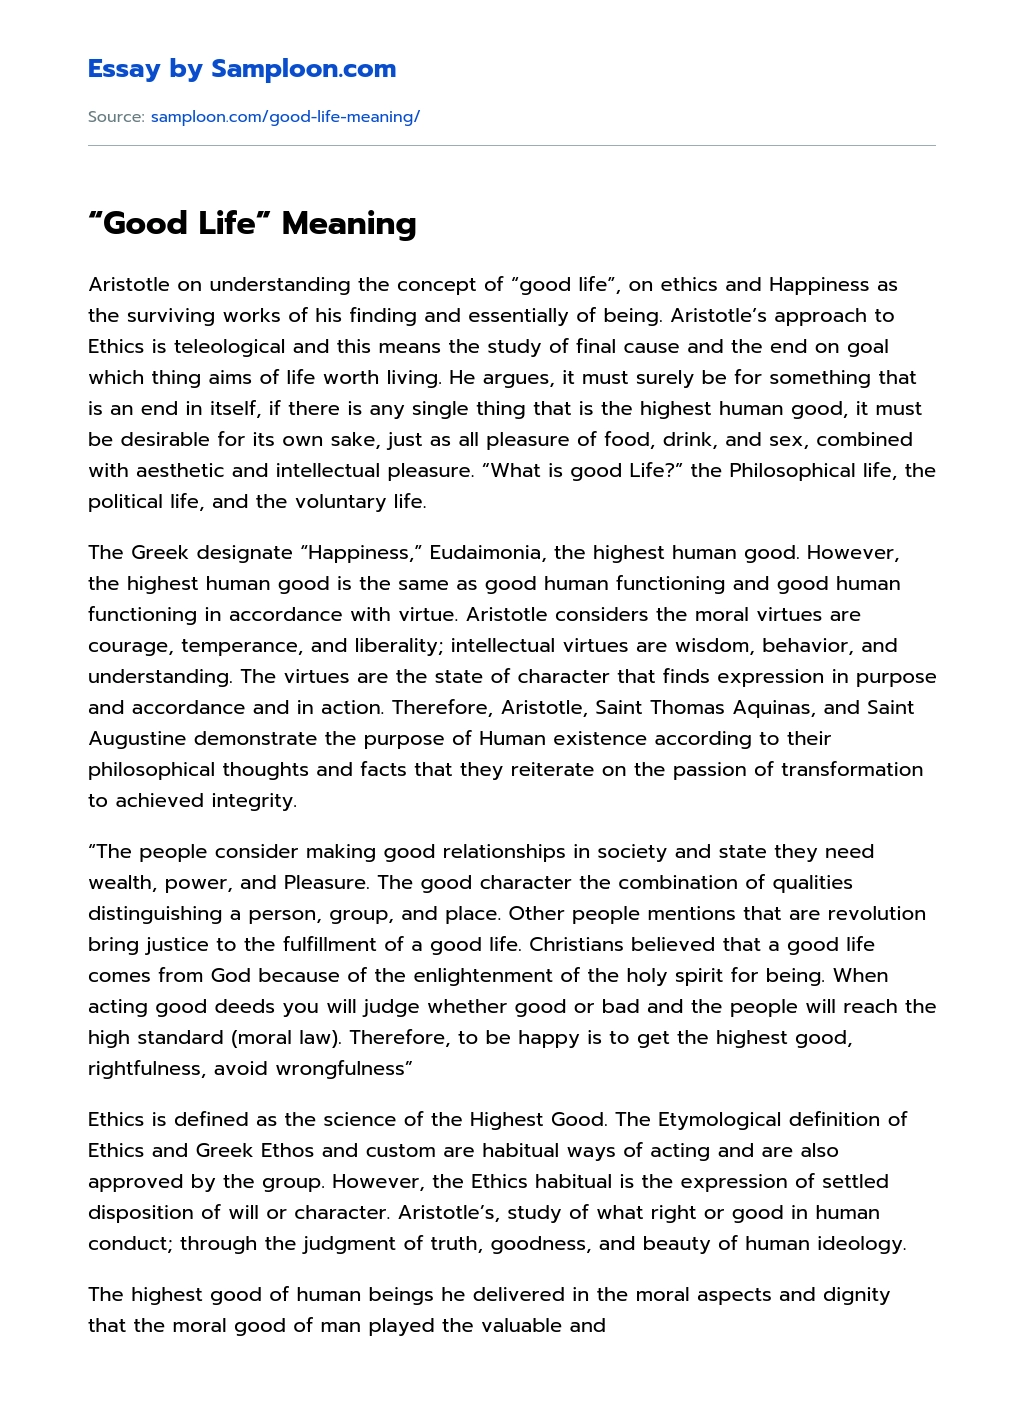 meaning and purpose of life essay